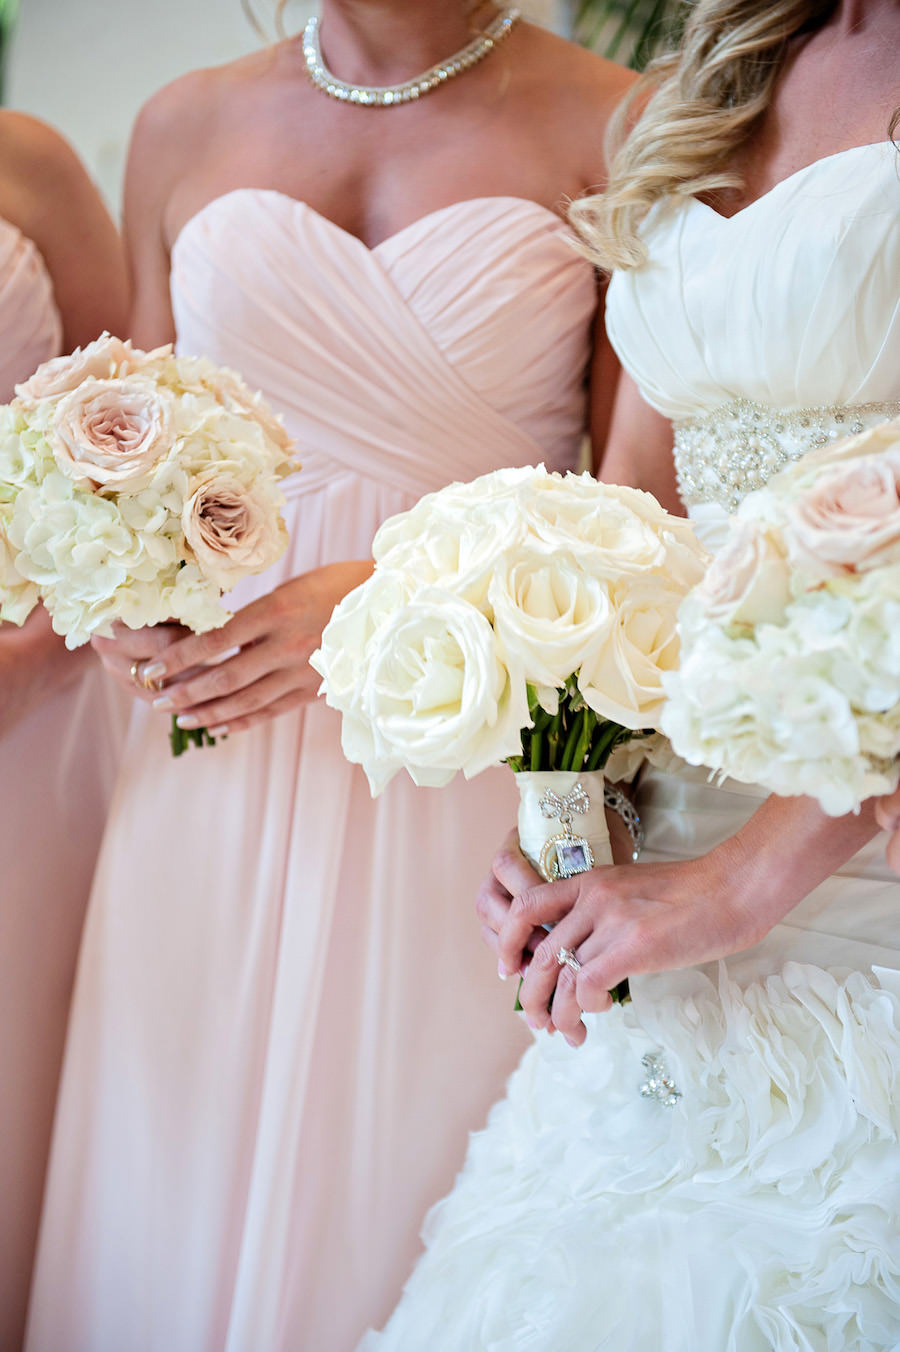 Blush Pink Strapless Bill Levkoff Bridesmaid Dresses and White Sweetheart Jacquelin Exclusive Wedding Dress with Rhinestone Belt and Ruffles with Pink, White and Ivory Rose and Hydrangea Wedding Bouquet